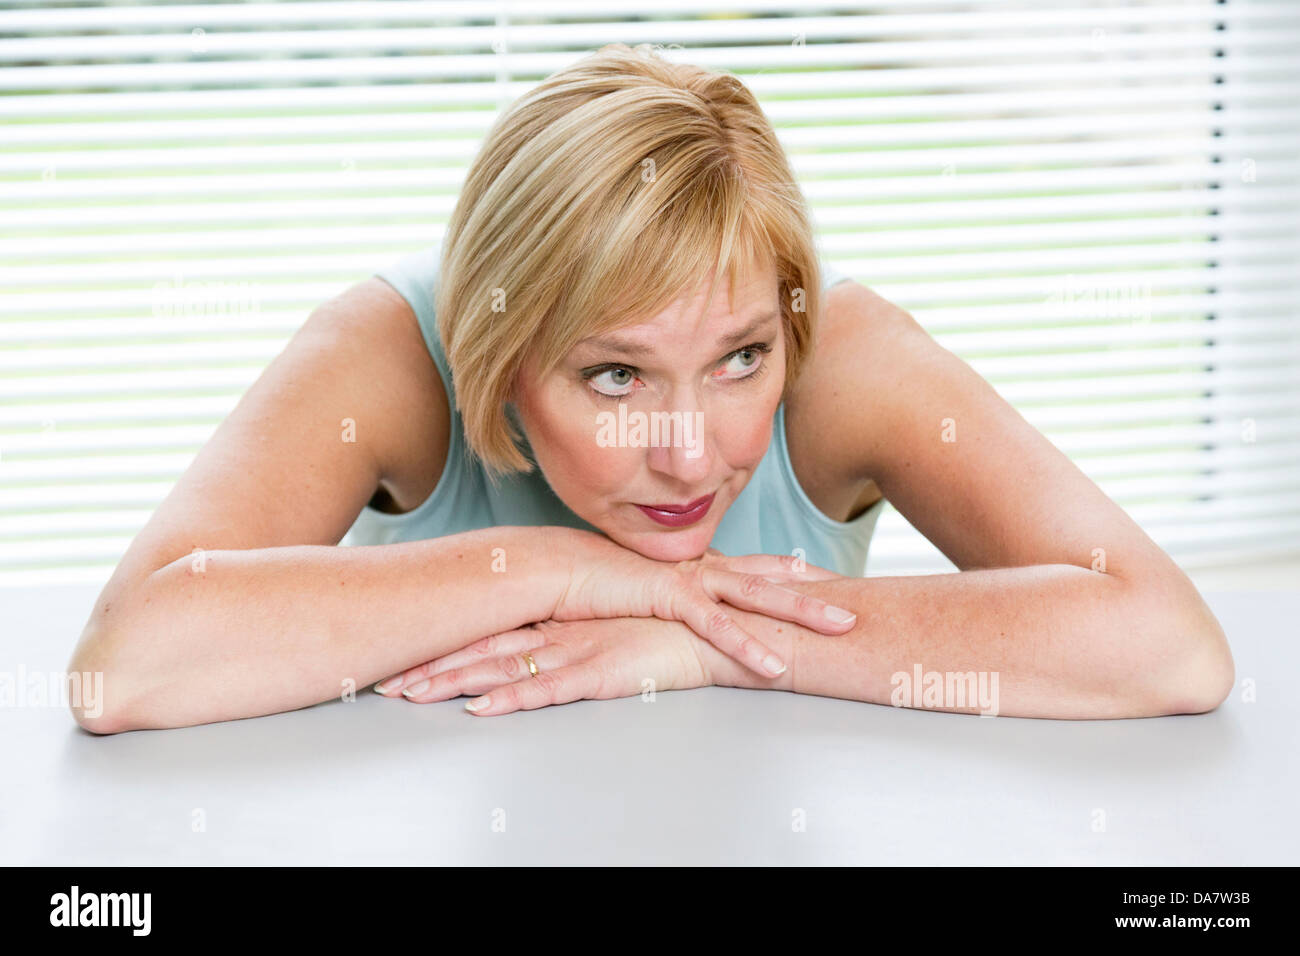 woman looking worried and concerned Stock Photo